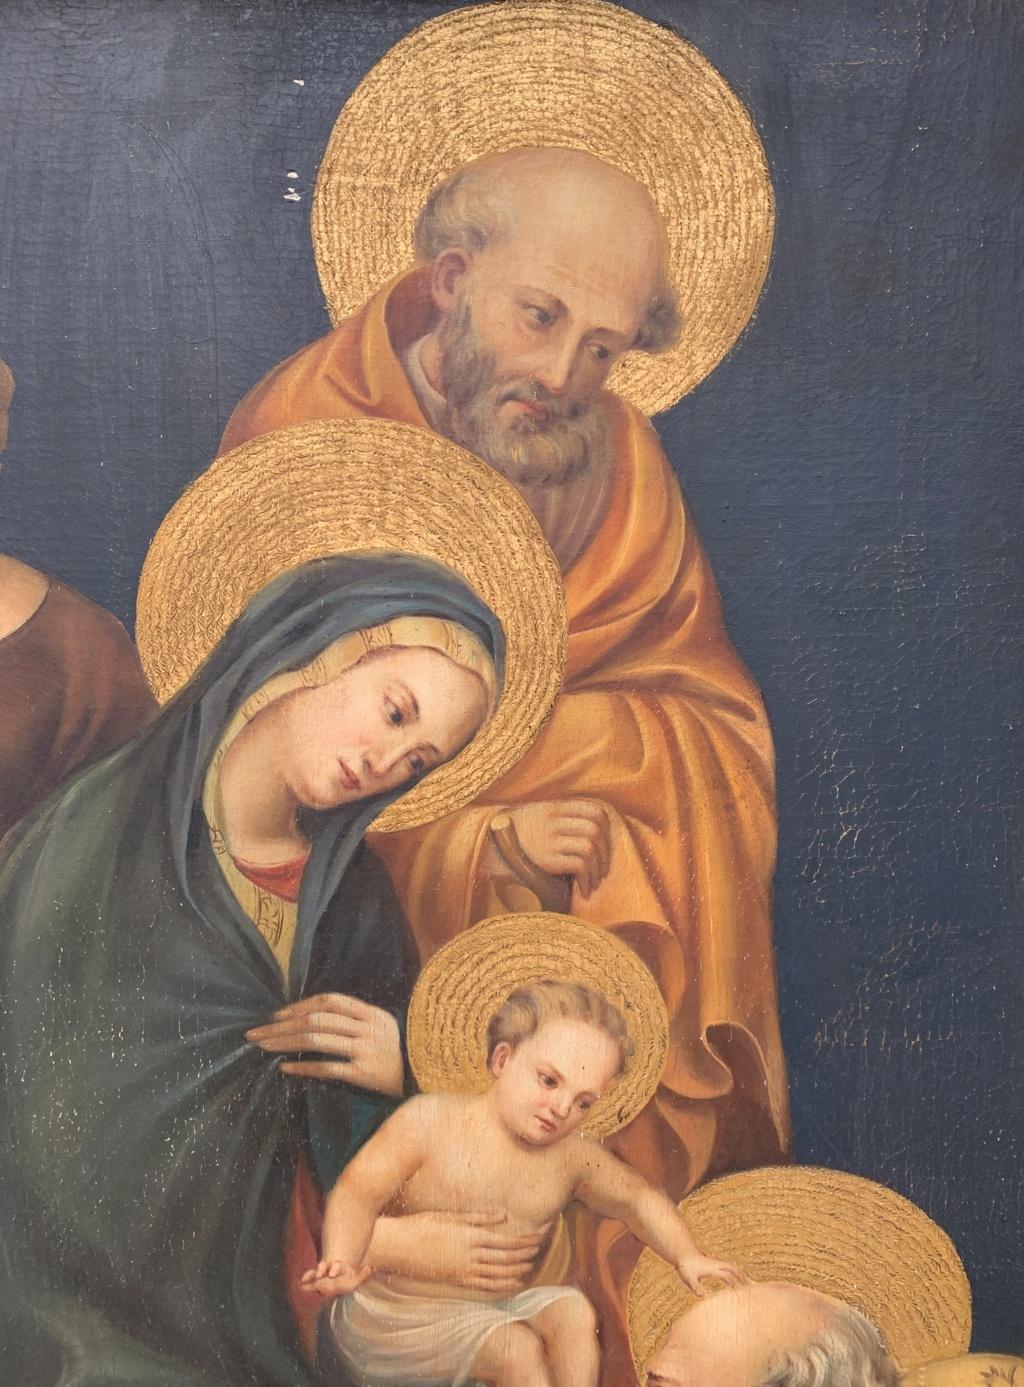 Florentine painter (19th century) - Madonna with Child, Saint Joseph and Saints.

90 x 56 cm without frame, 118 x 85 cm with frame.

Antique oil painting on wood, in a carved and gilded wooden frame (some breakages).

Condition report: Good state of